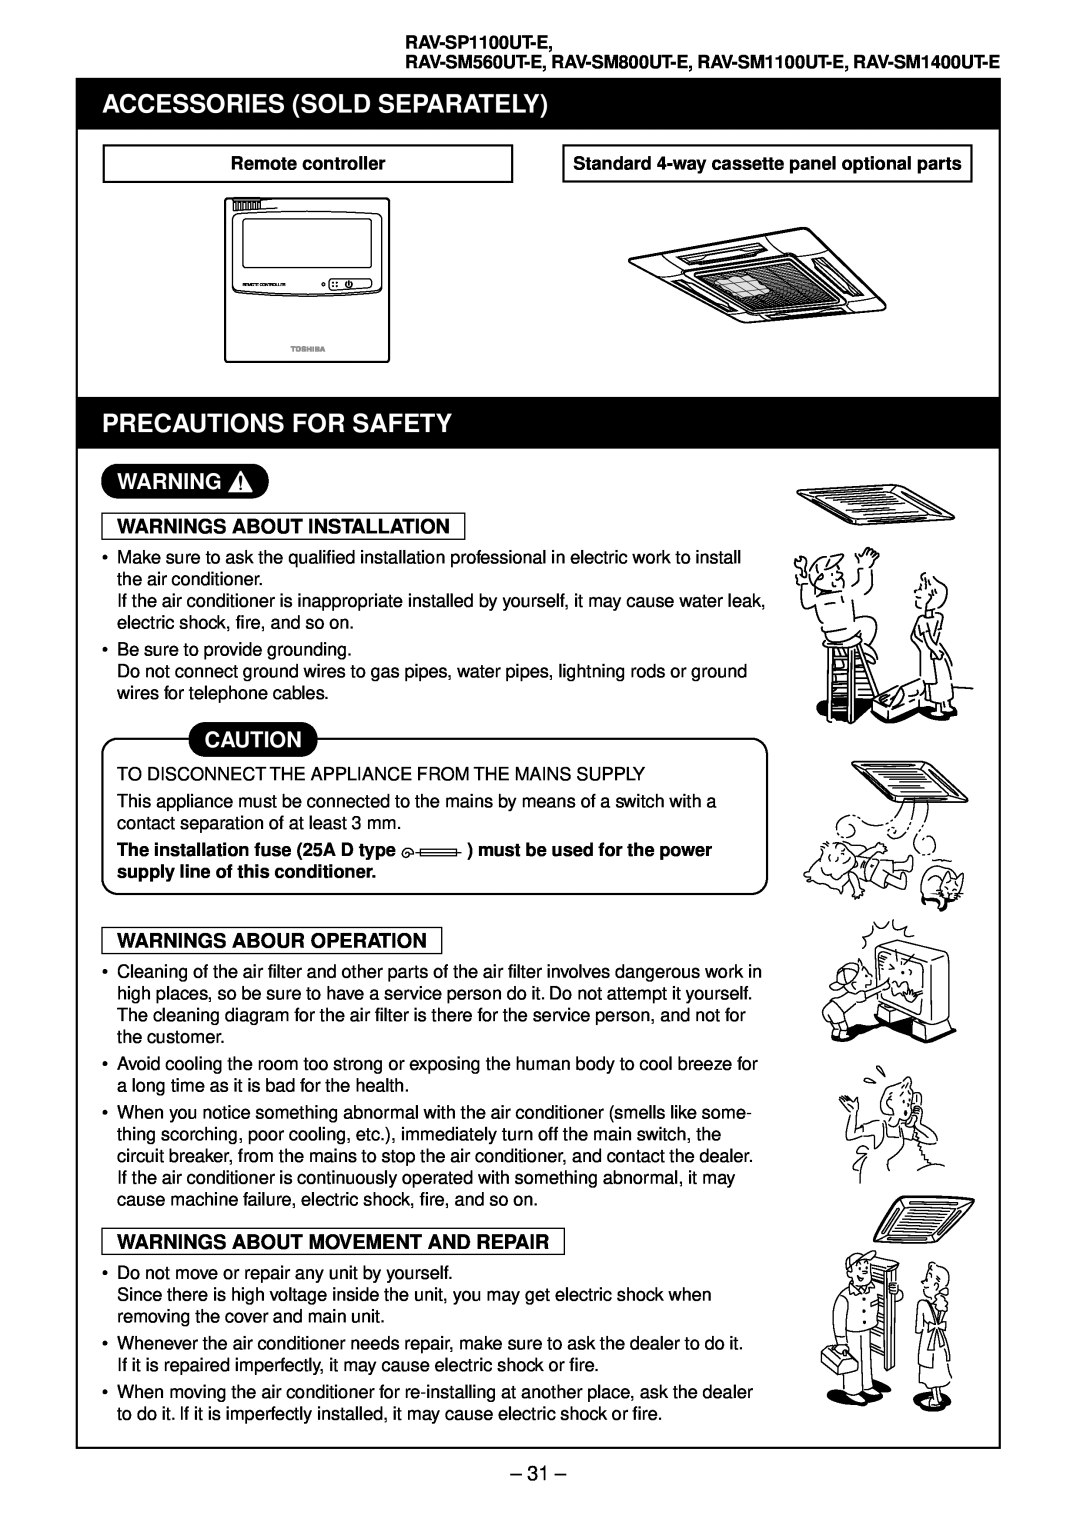 Toshiba RAV-SM561AT-E Accessories Sold Separately, Precautions For Safety, Warnings About Installation, RAV-SP1100UT-E 